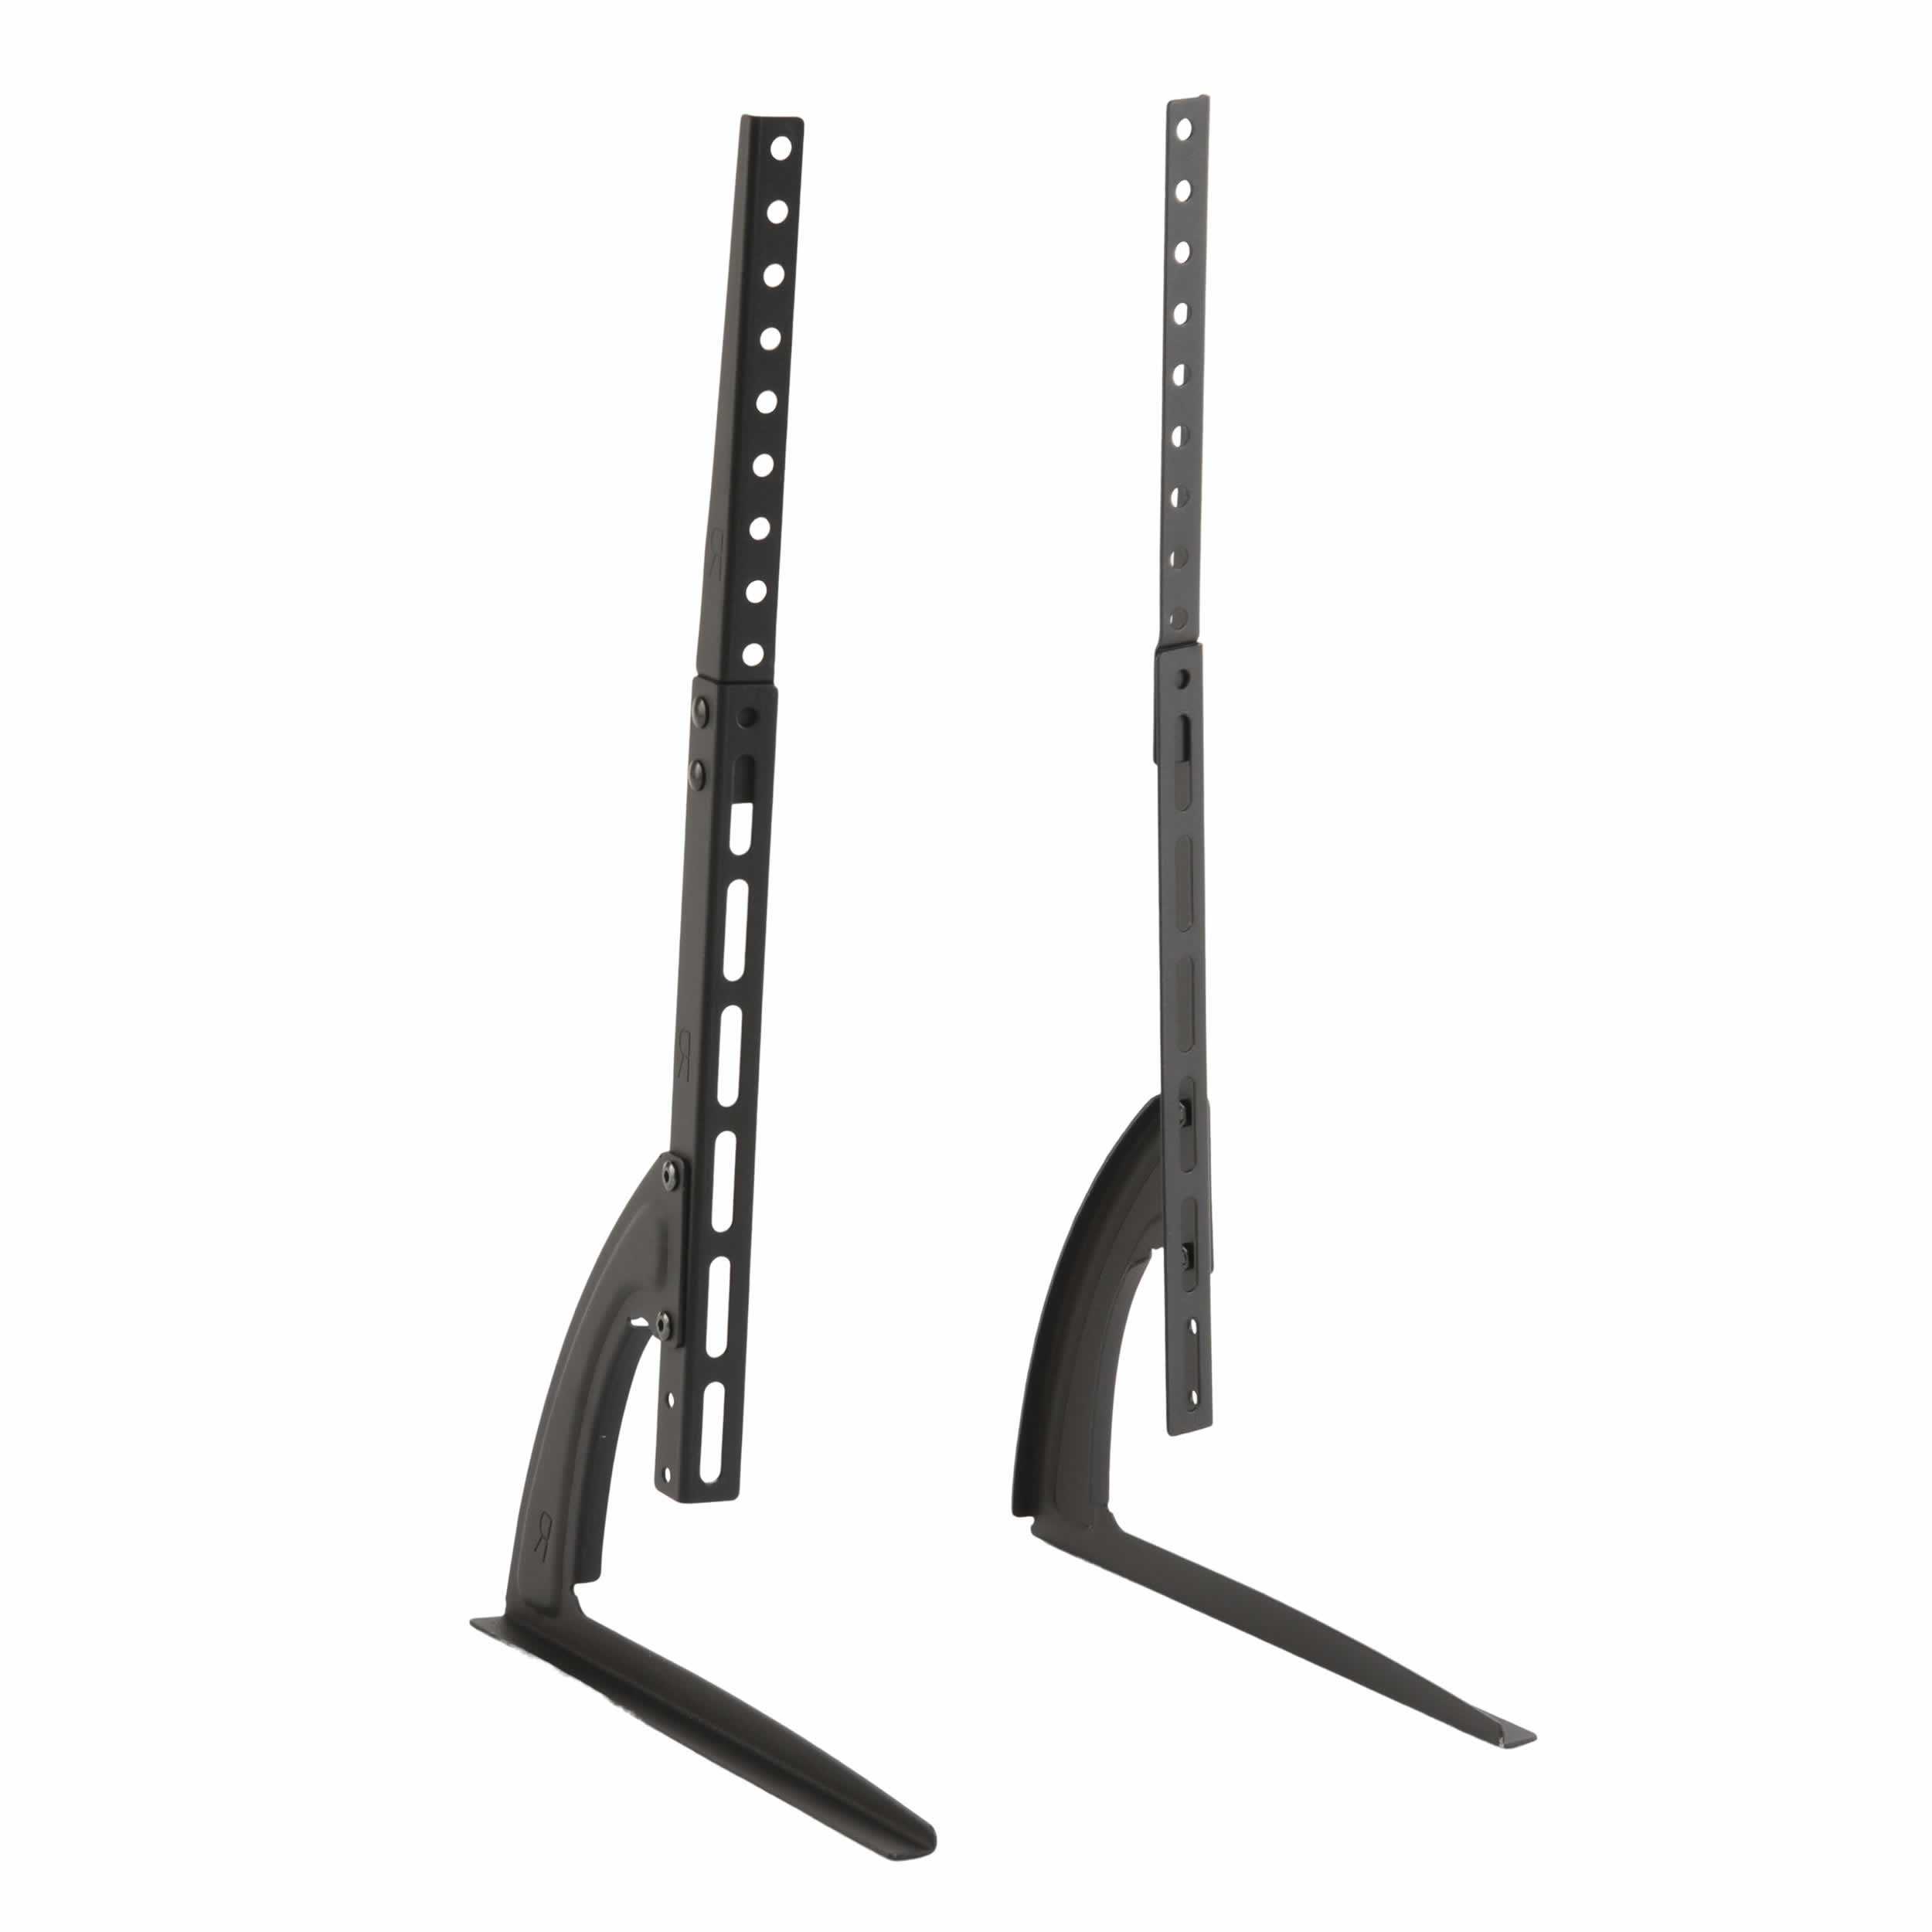 TTAP Universal TV Stand Legs for up to 70inch TVs